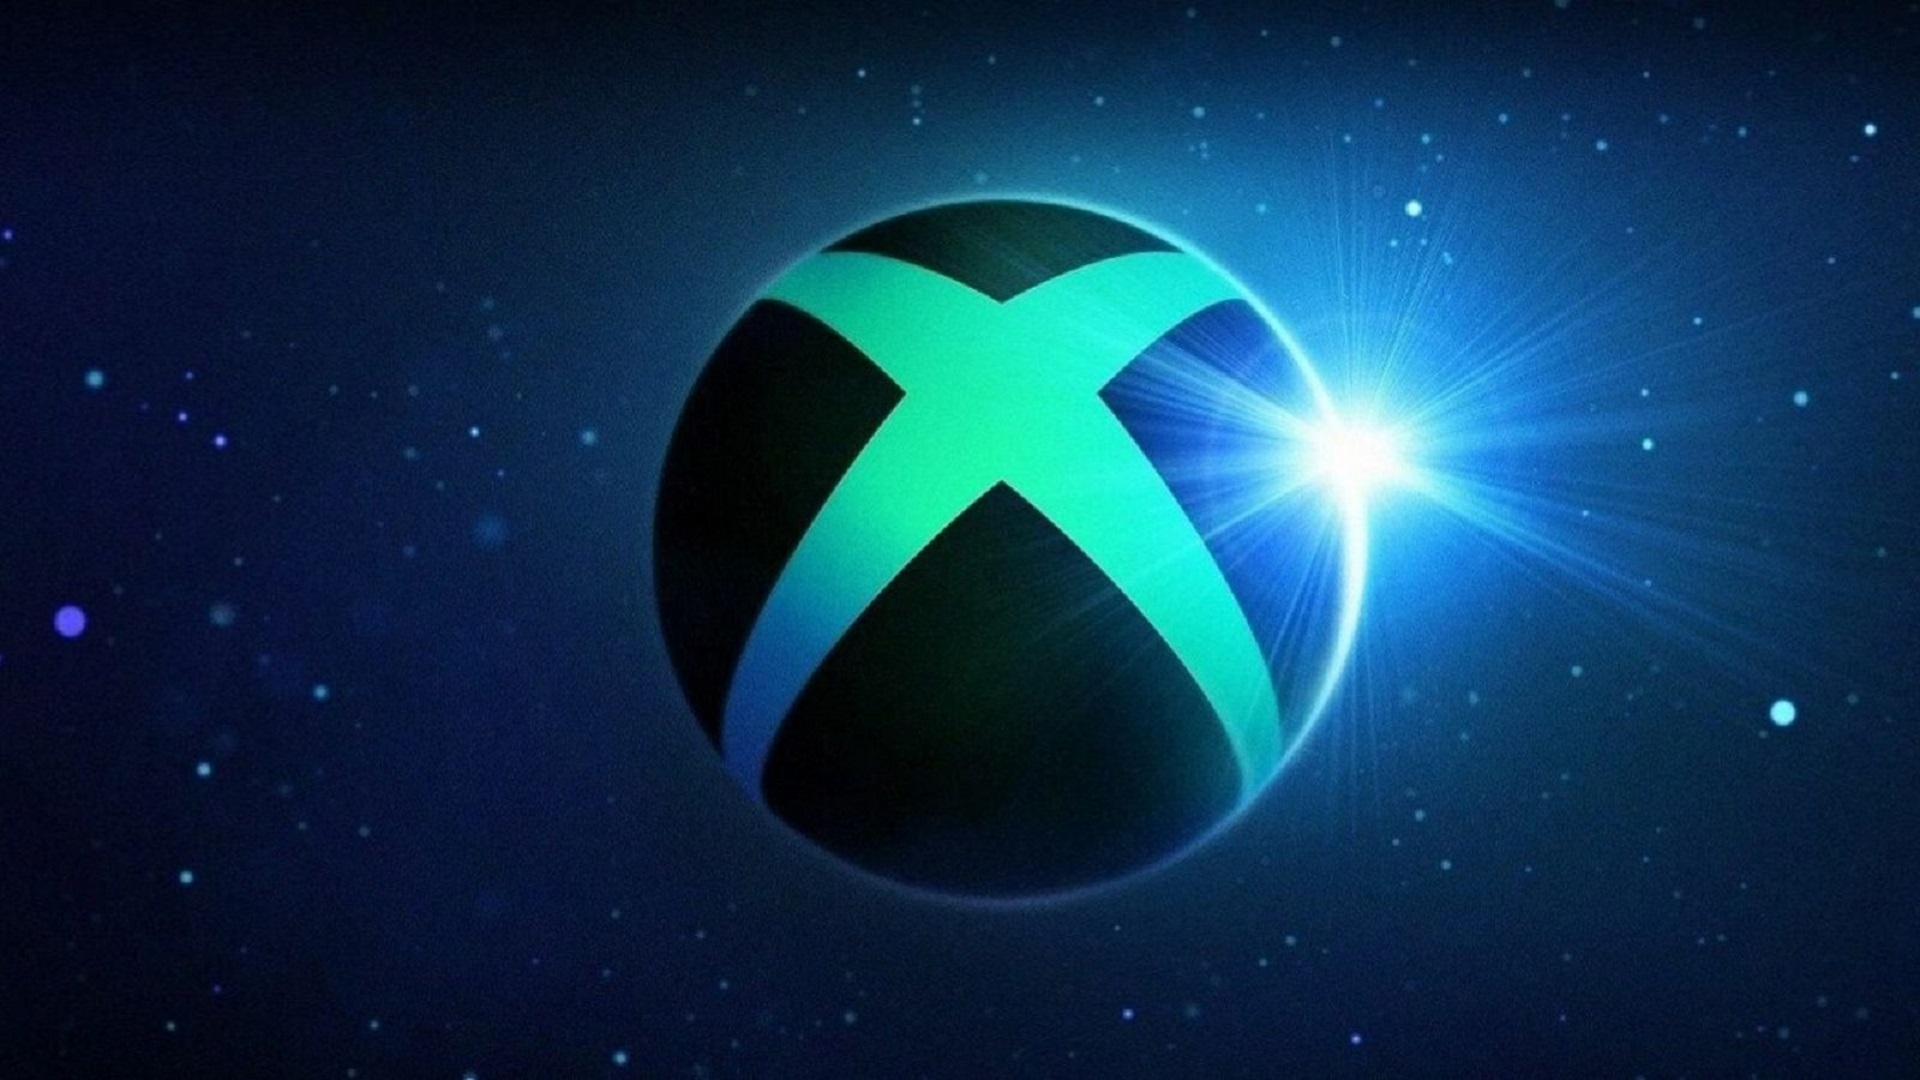 Xbox Cloud Gaming is seeing increased queue times as demand surges : r/Games